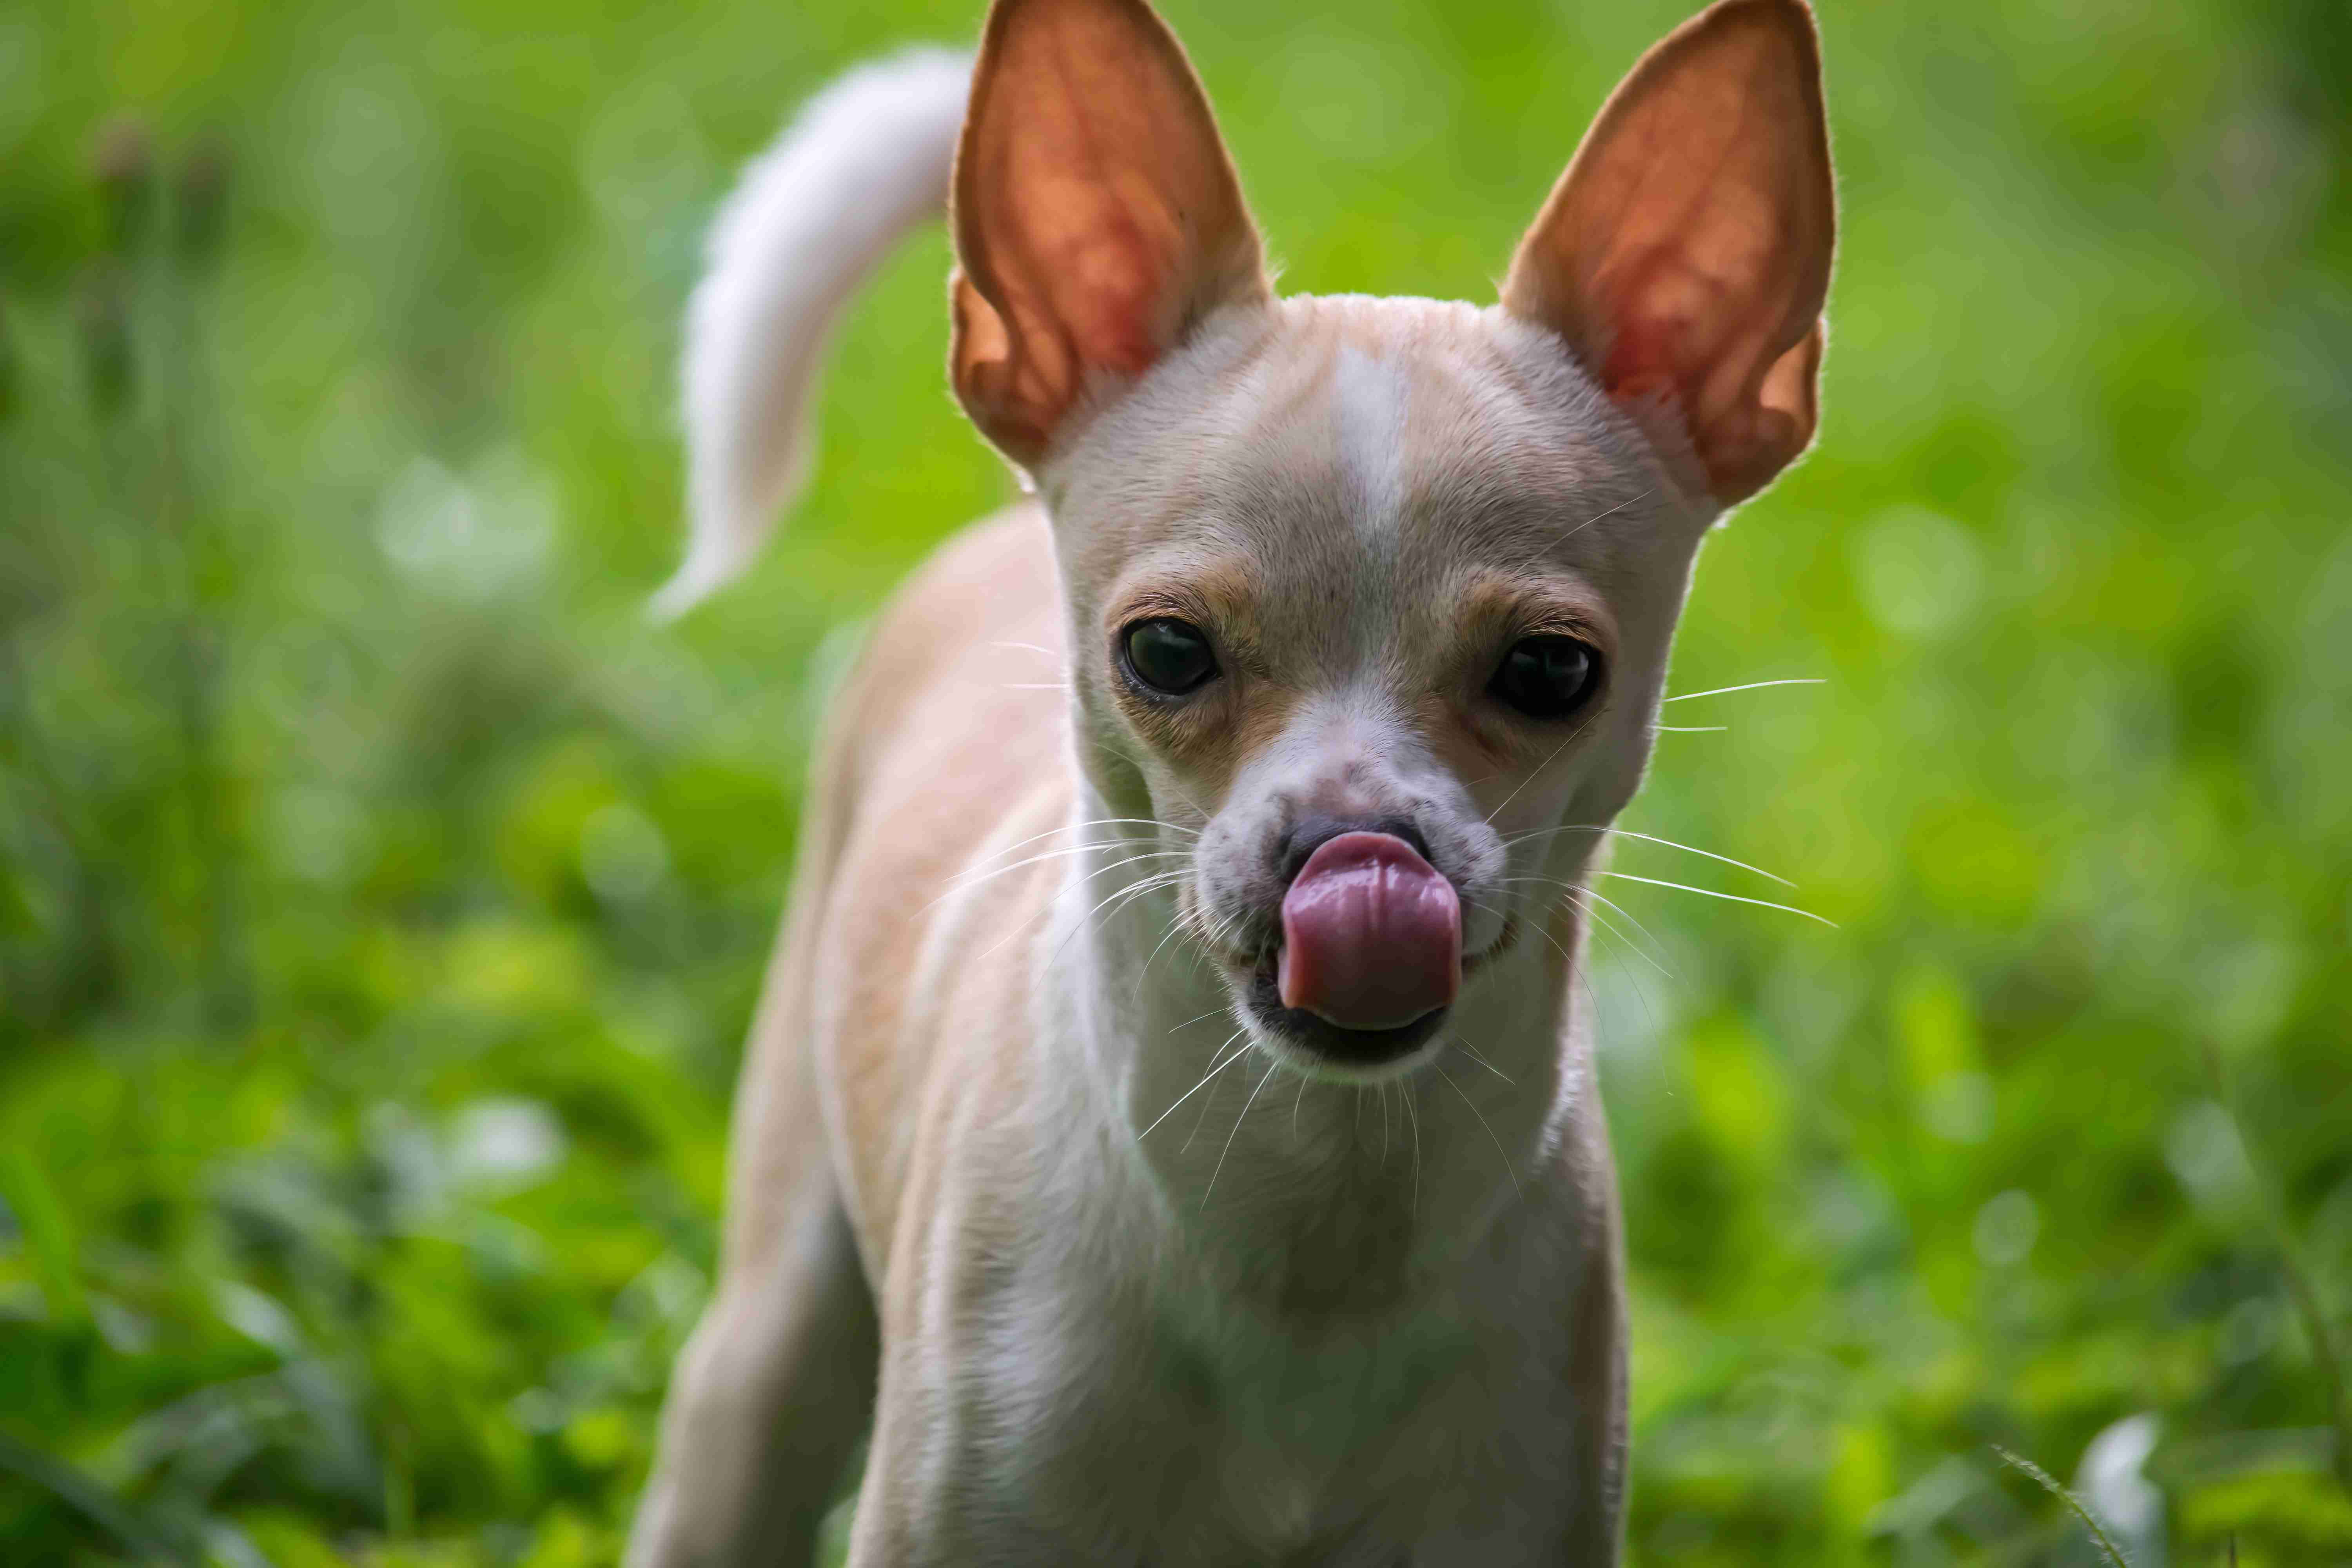 Are there any breeds that are more likely to be aggressive towards Chihuahuas, and if so, which ones?